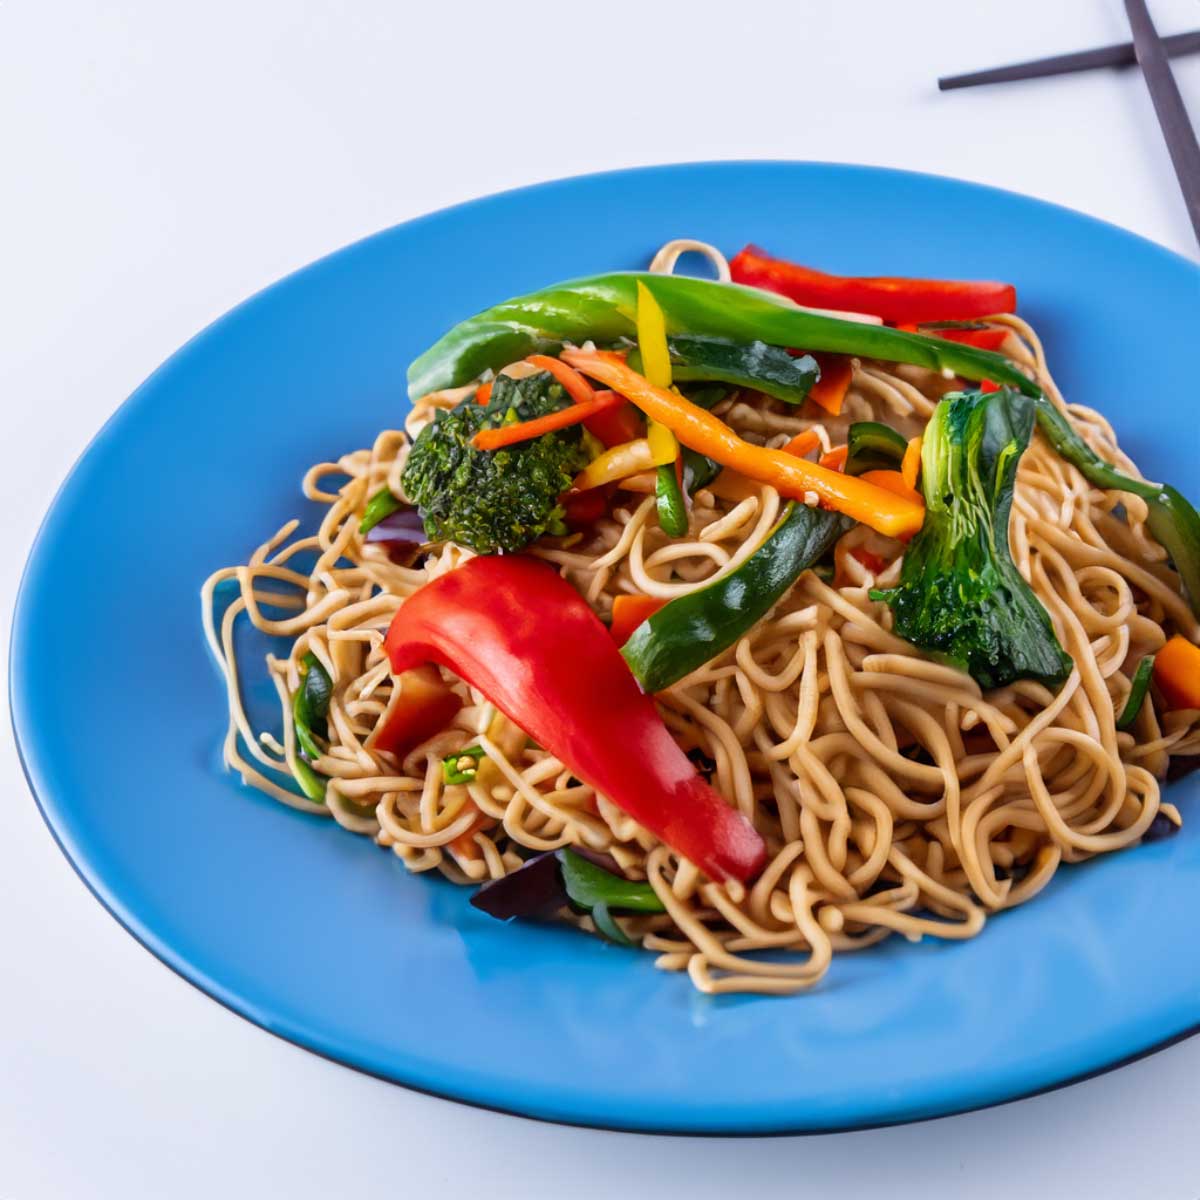 Featured image for “Soba Stir-Fry with Colorful Vegetables”